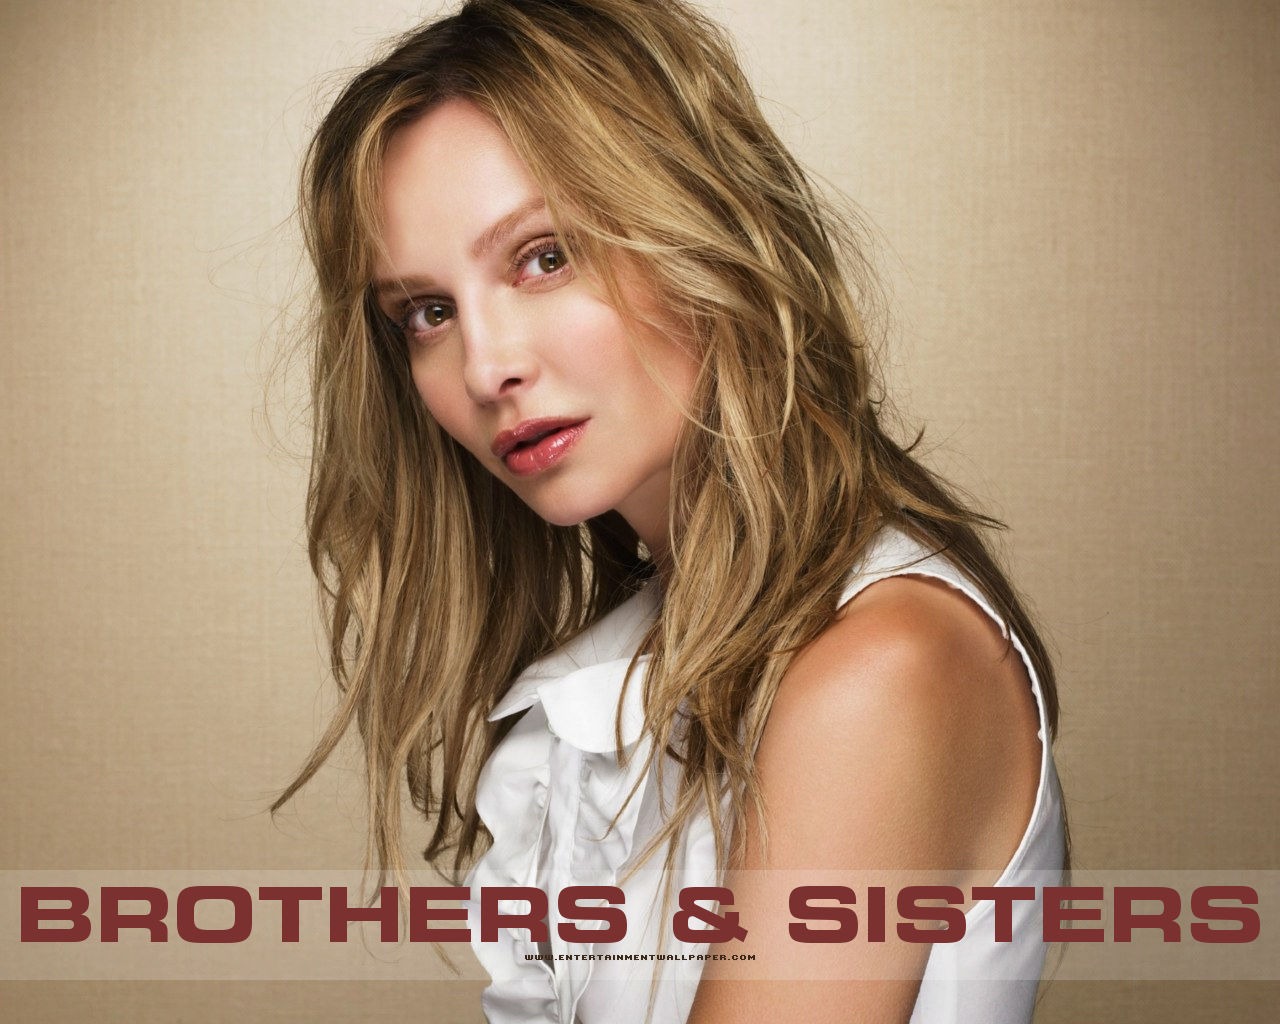 Brothers & Sisters 兄弟姐妹24 - 1280x1024